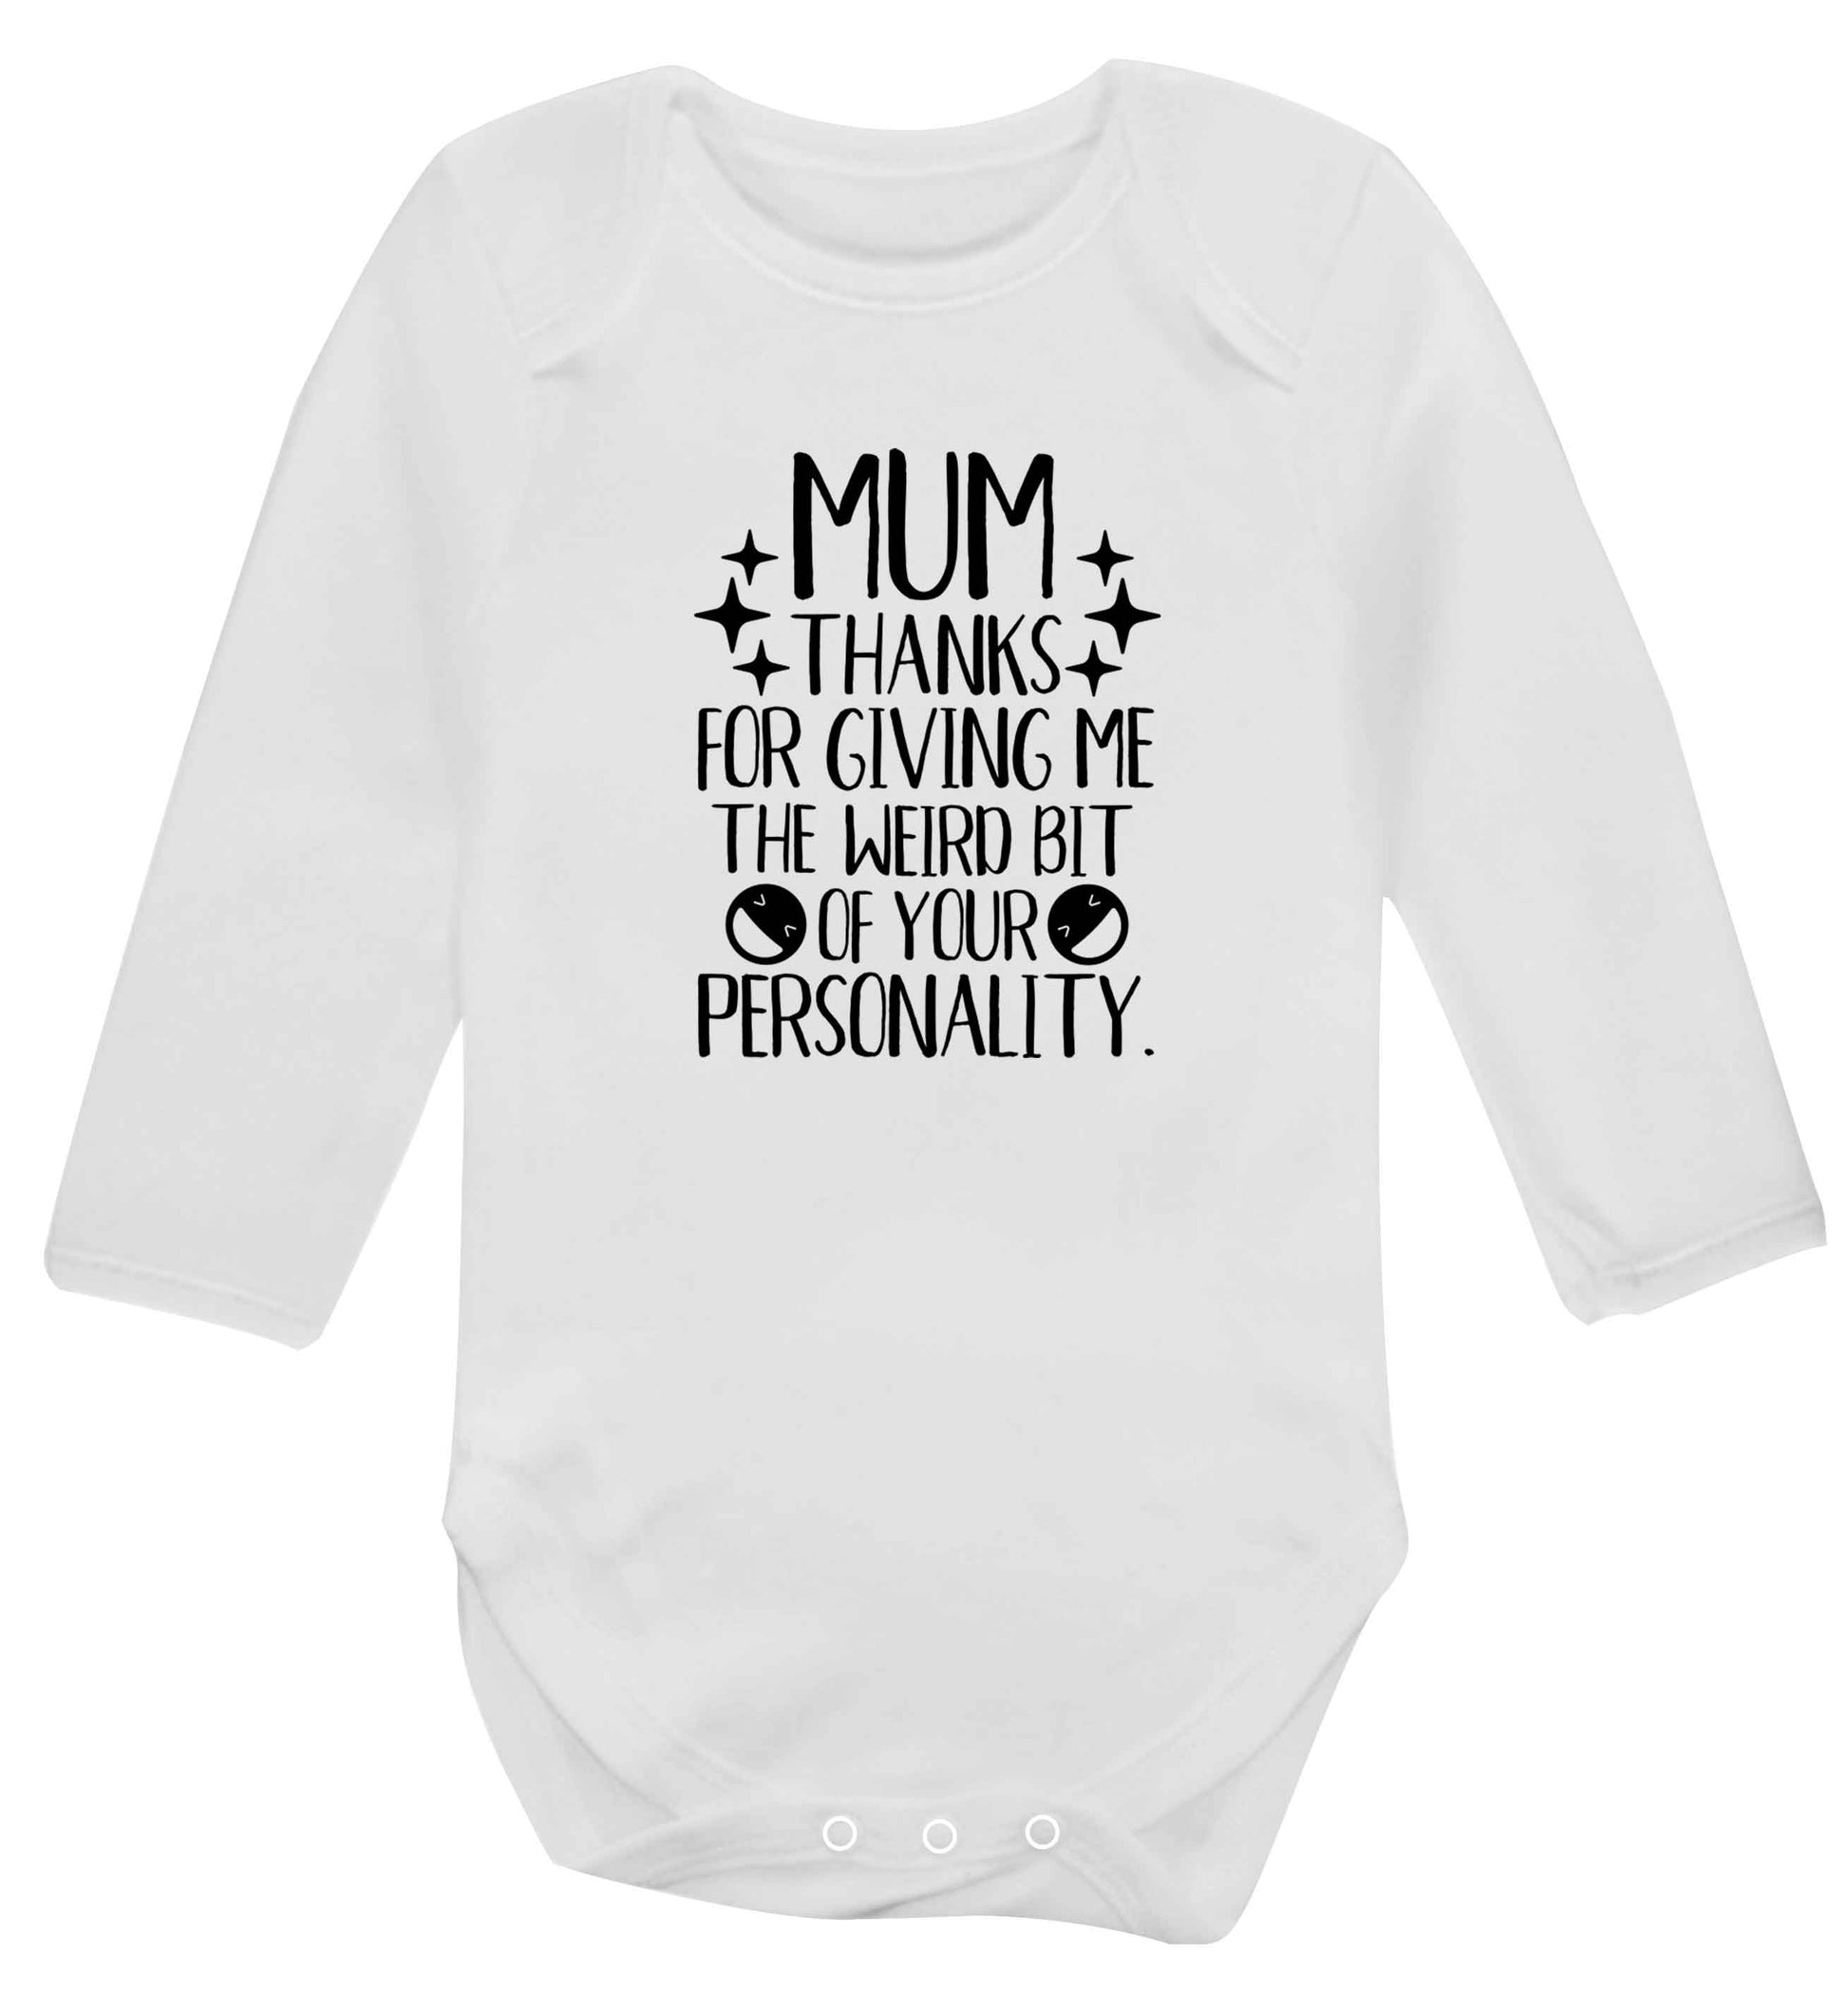 Mum, I love you more than halloumi and if you know me at all you know how deep that is baby vest long sleeved white 6-12 months